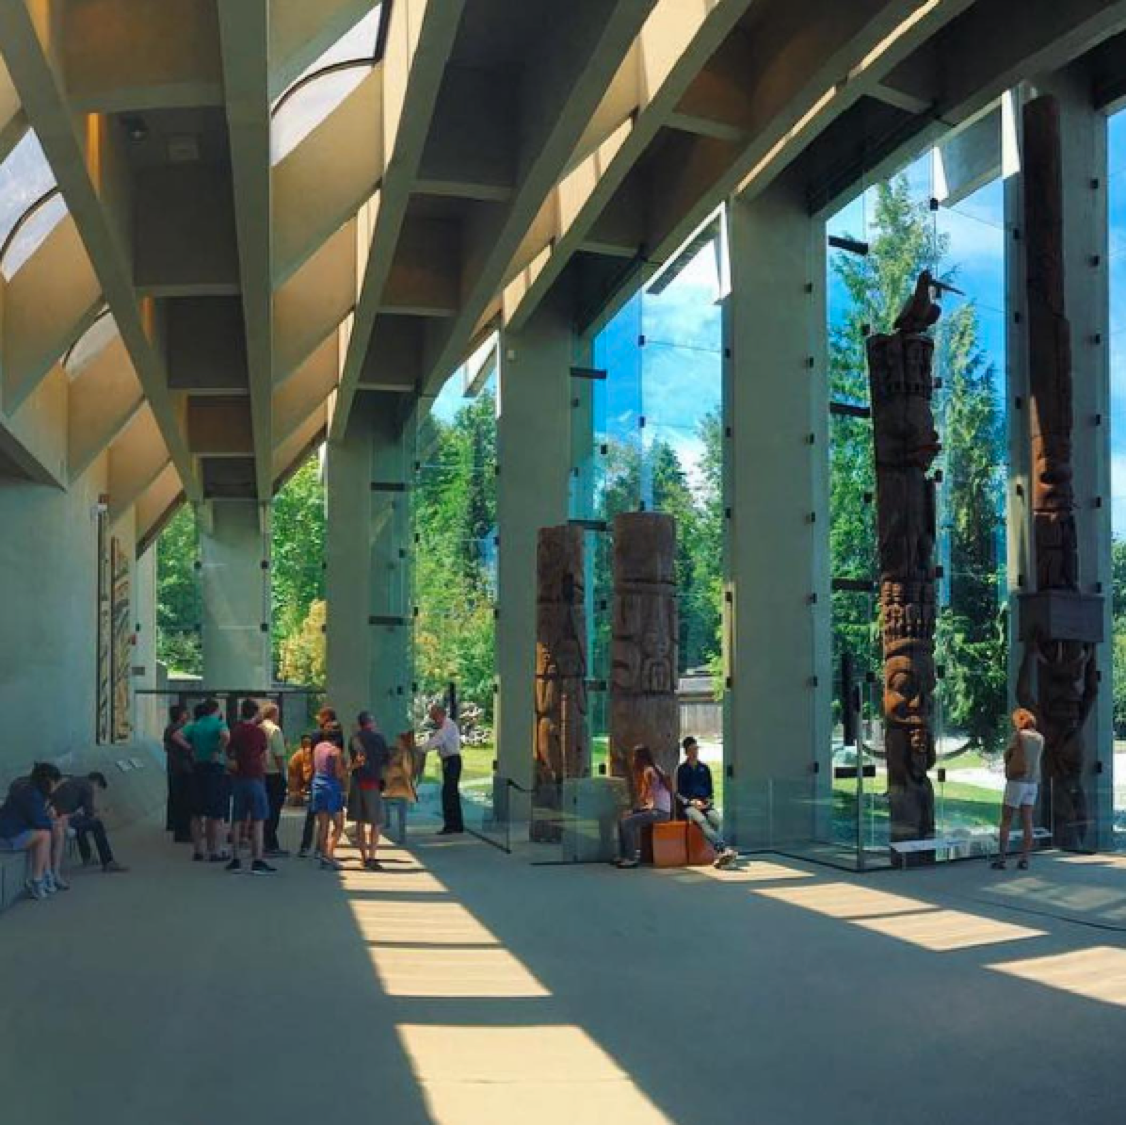 Sun's out @moa_ubc The Museum of Anthropology tells amazing stories about #FirstNation people through exhibits about their art.   #Repost @fleex3 #澳门二四六天天彩 #yvr